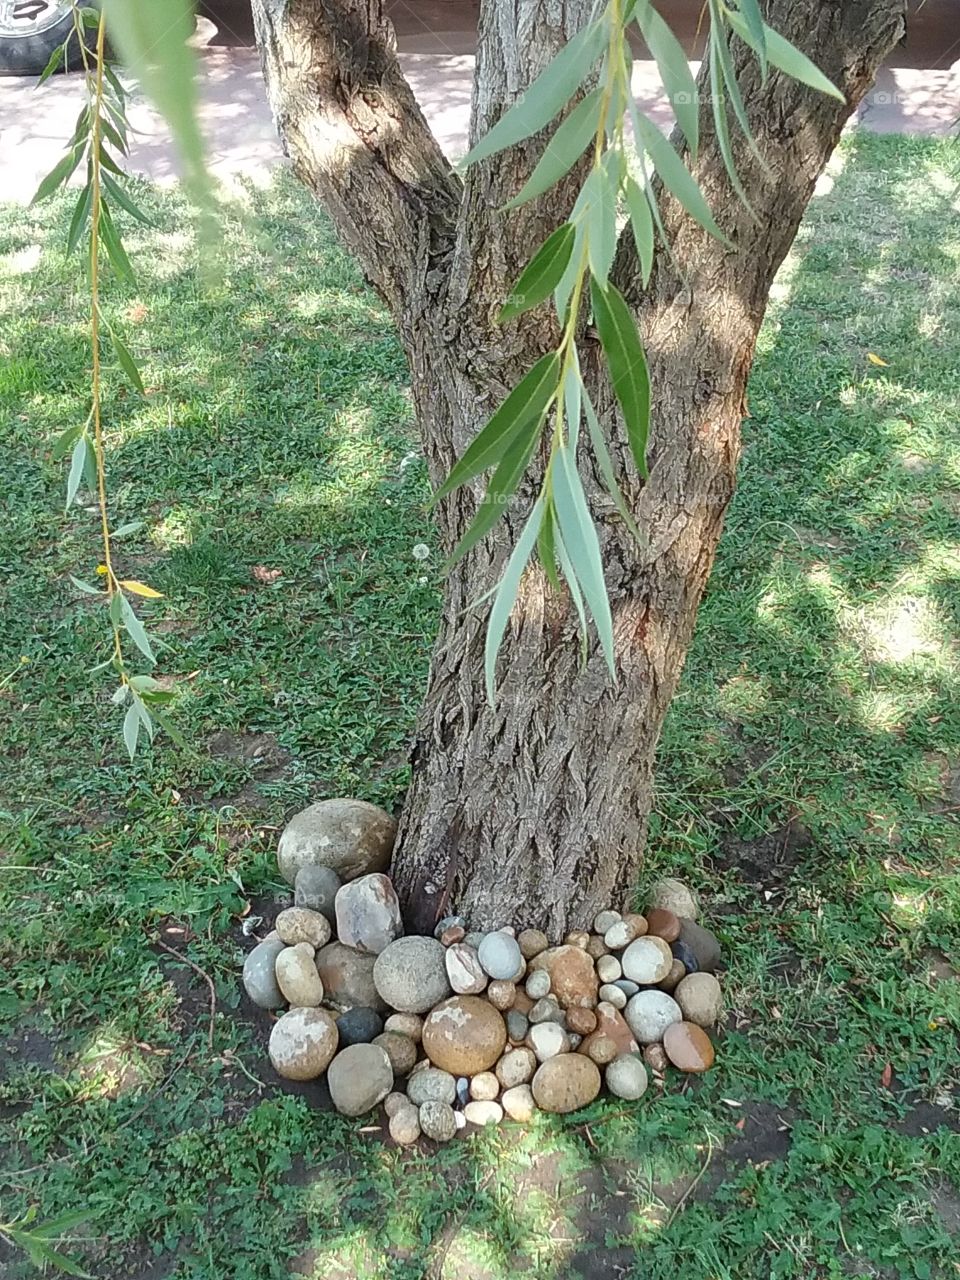 Some nice round river rock around the weep and willow tree out on the front lawn.